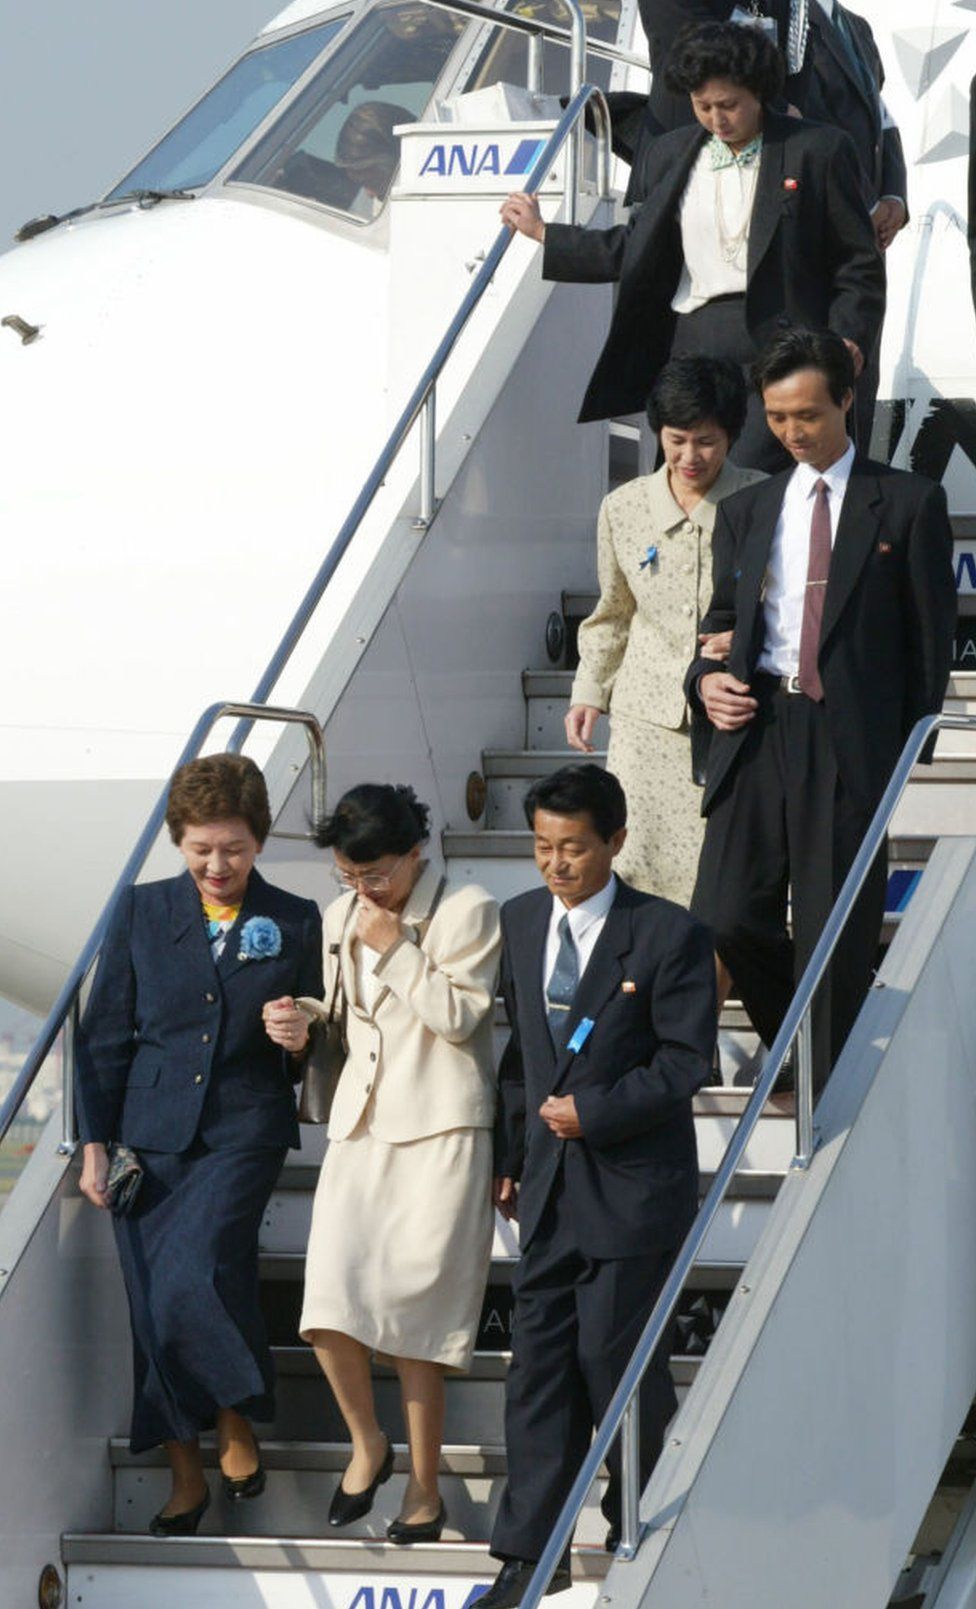 Five Japanese nationals, abducted to North Korea in the 1970s and 80s, arrive at Tokyo's Haneda Airport on October 15, 2002